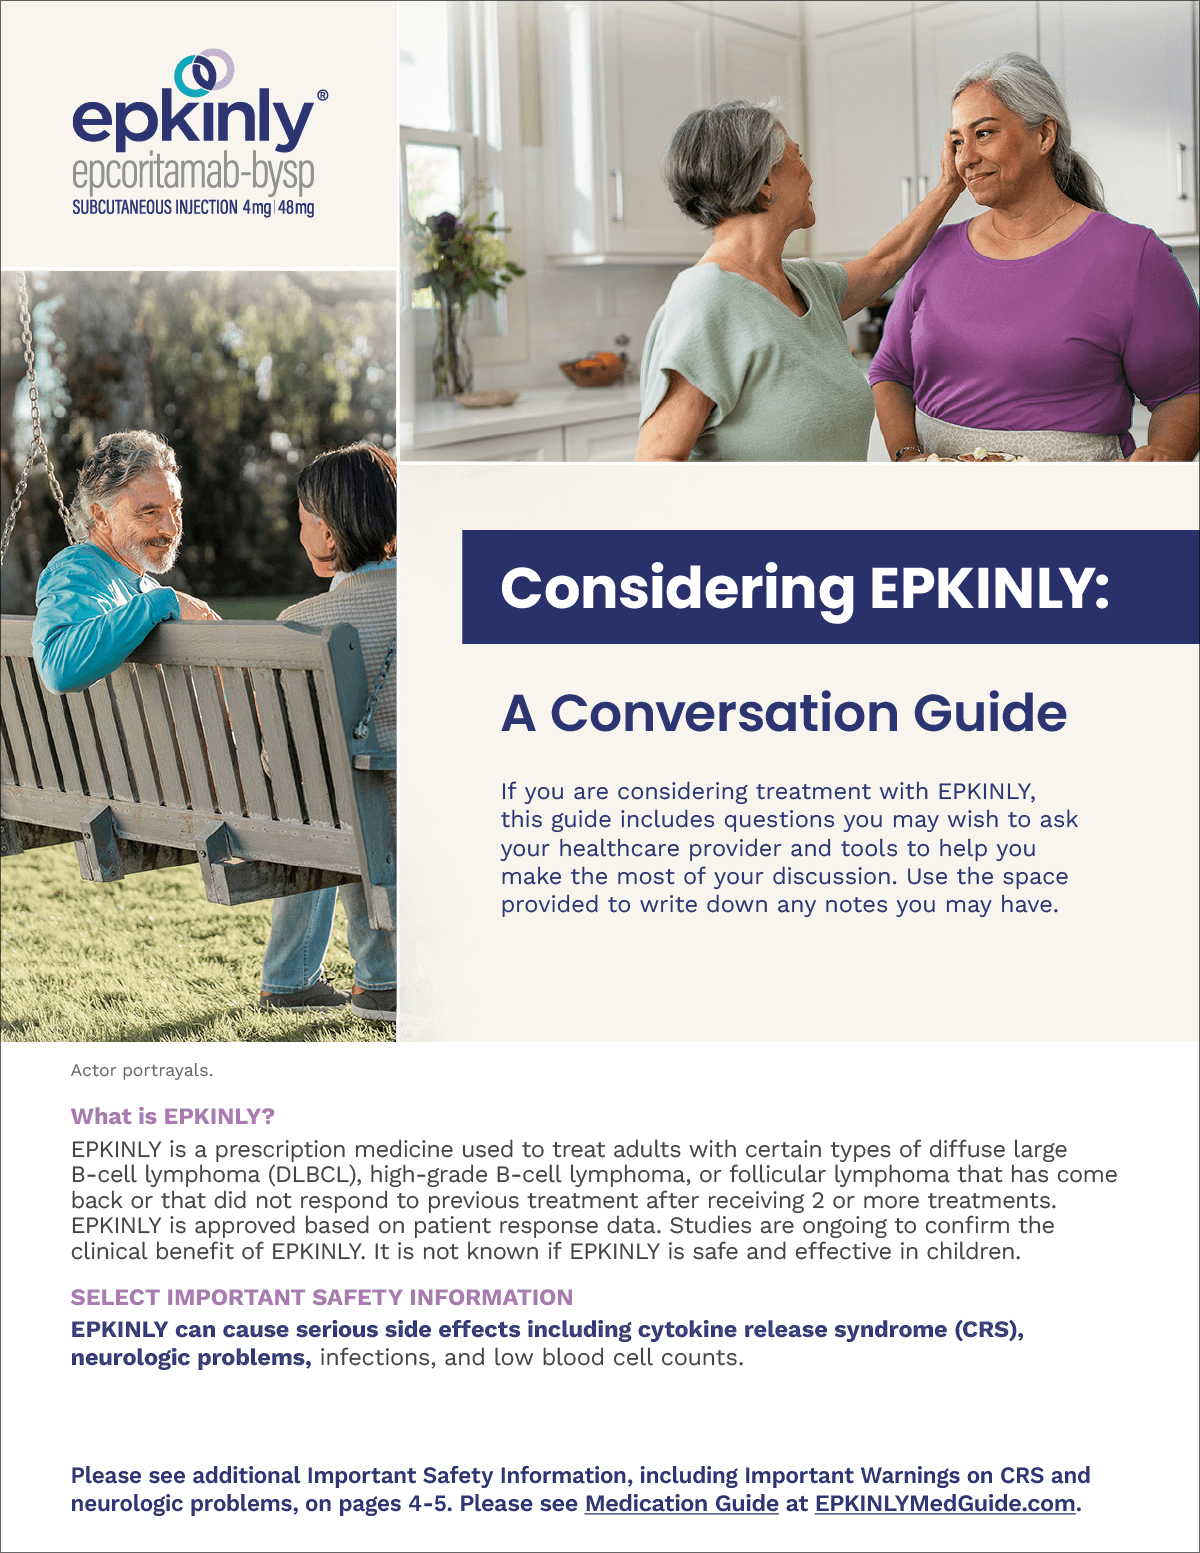 Download the EPKINLY® Treatment Consideration Guide.